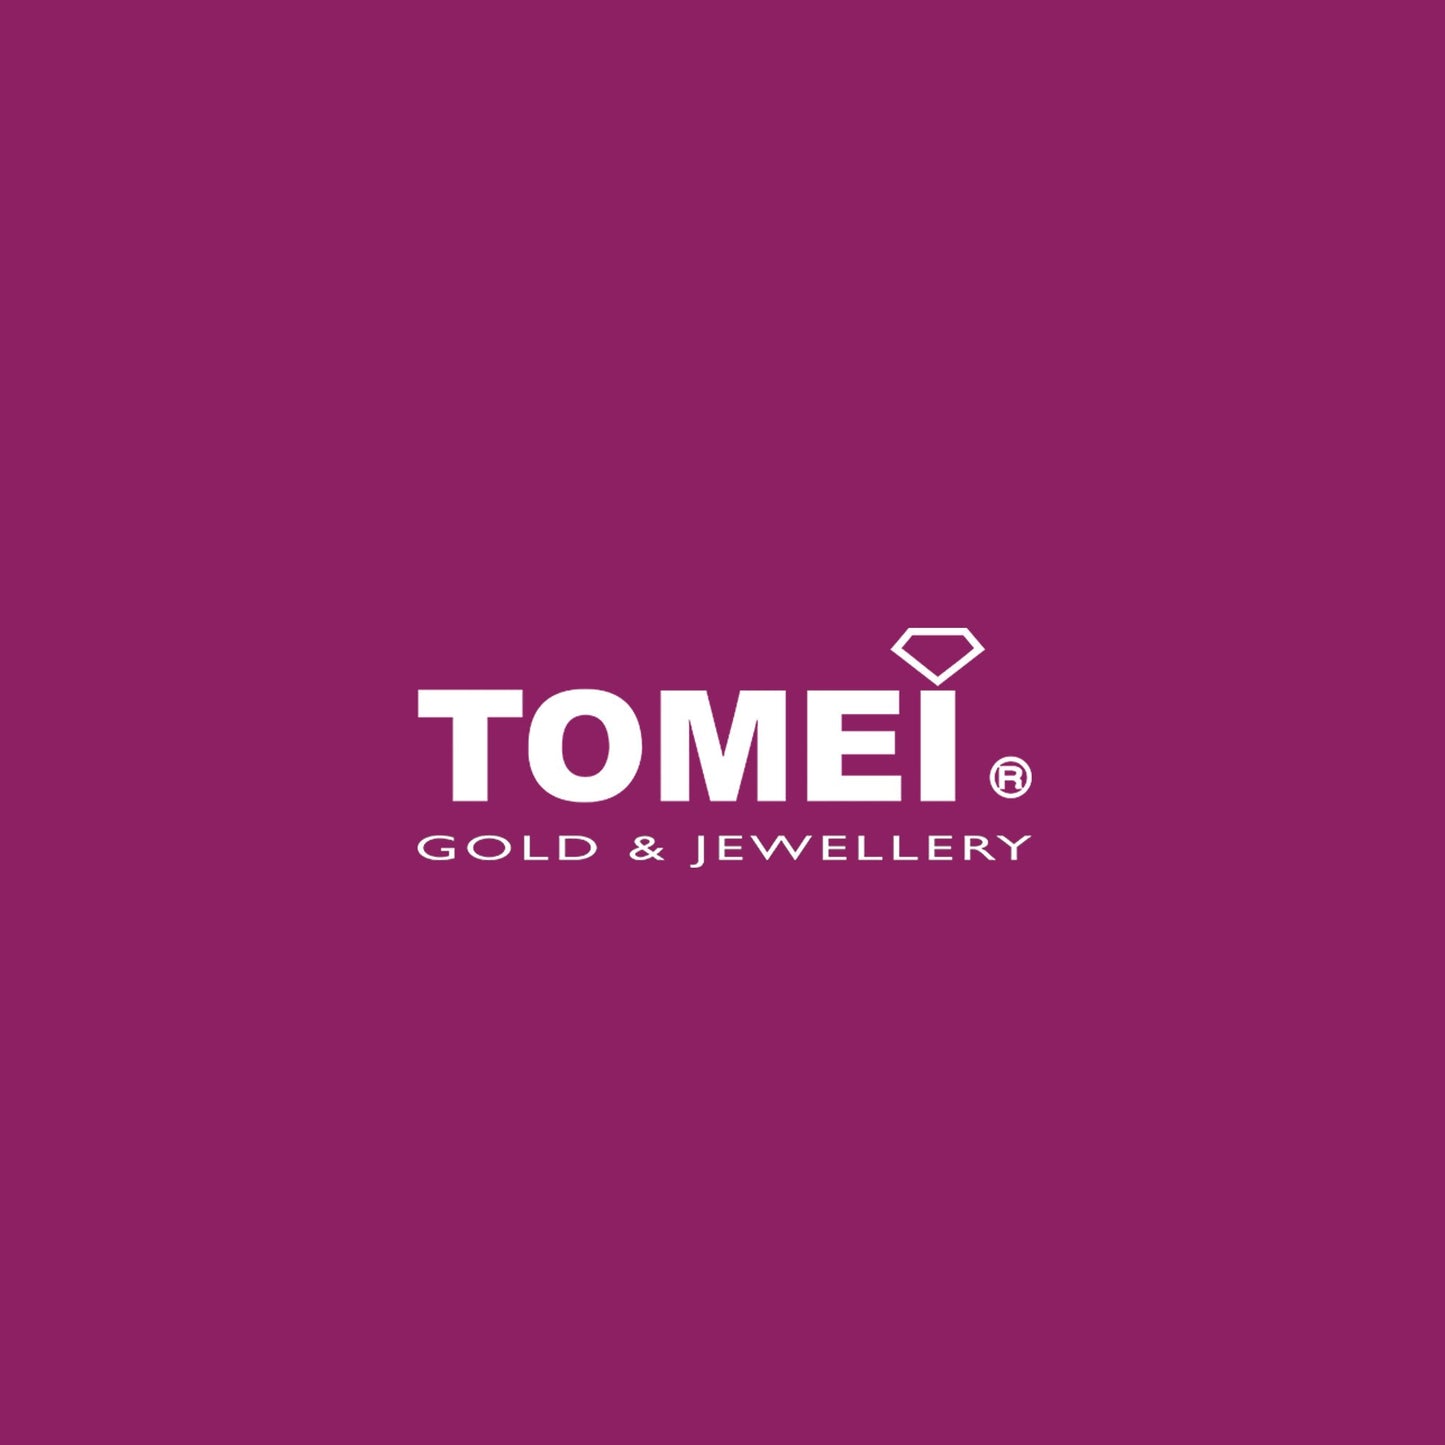 TOMEI Diamond Cut Collection Glimmering V Shape Ring, Yellow Gold 916